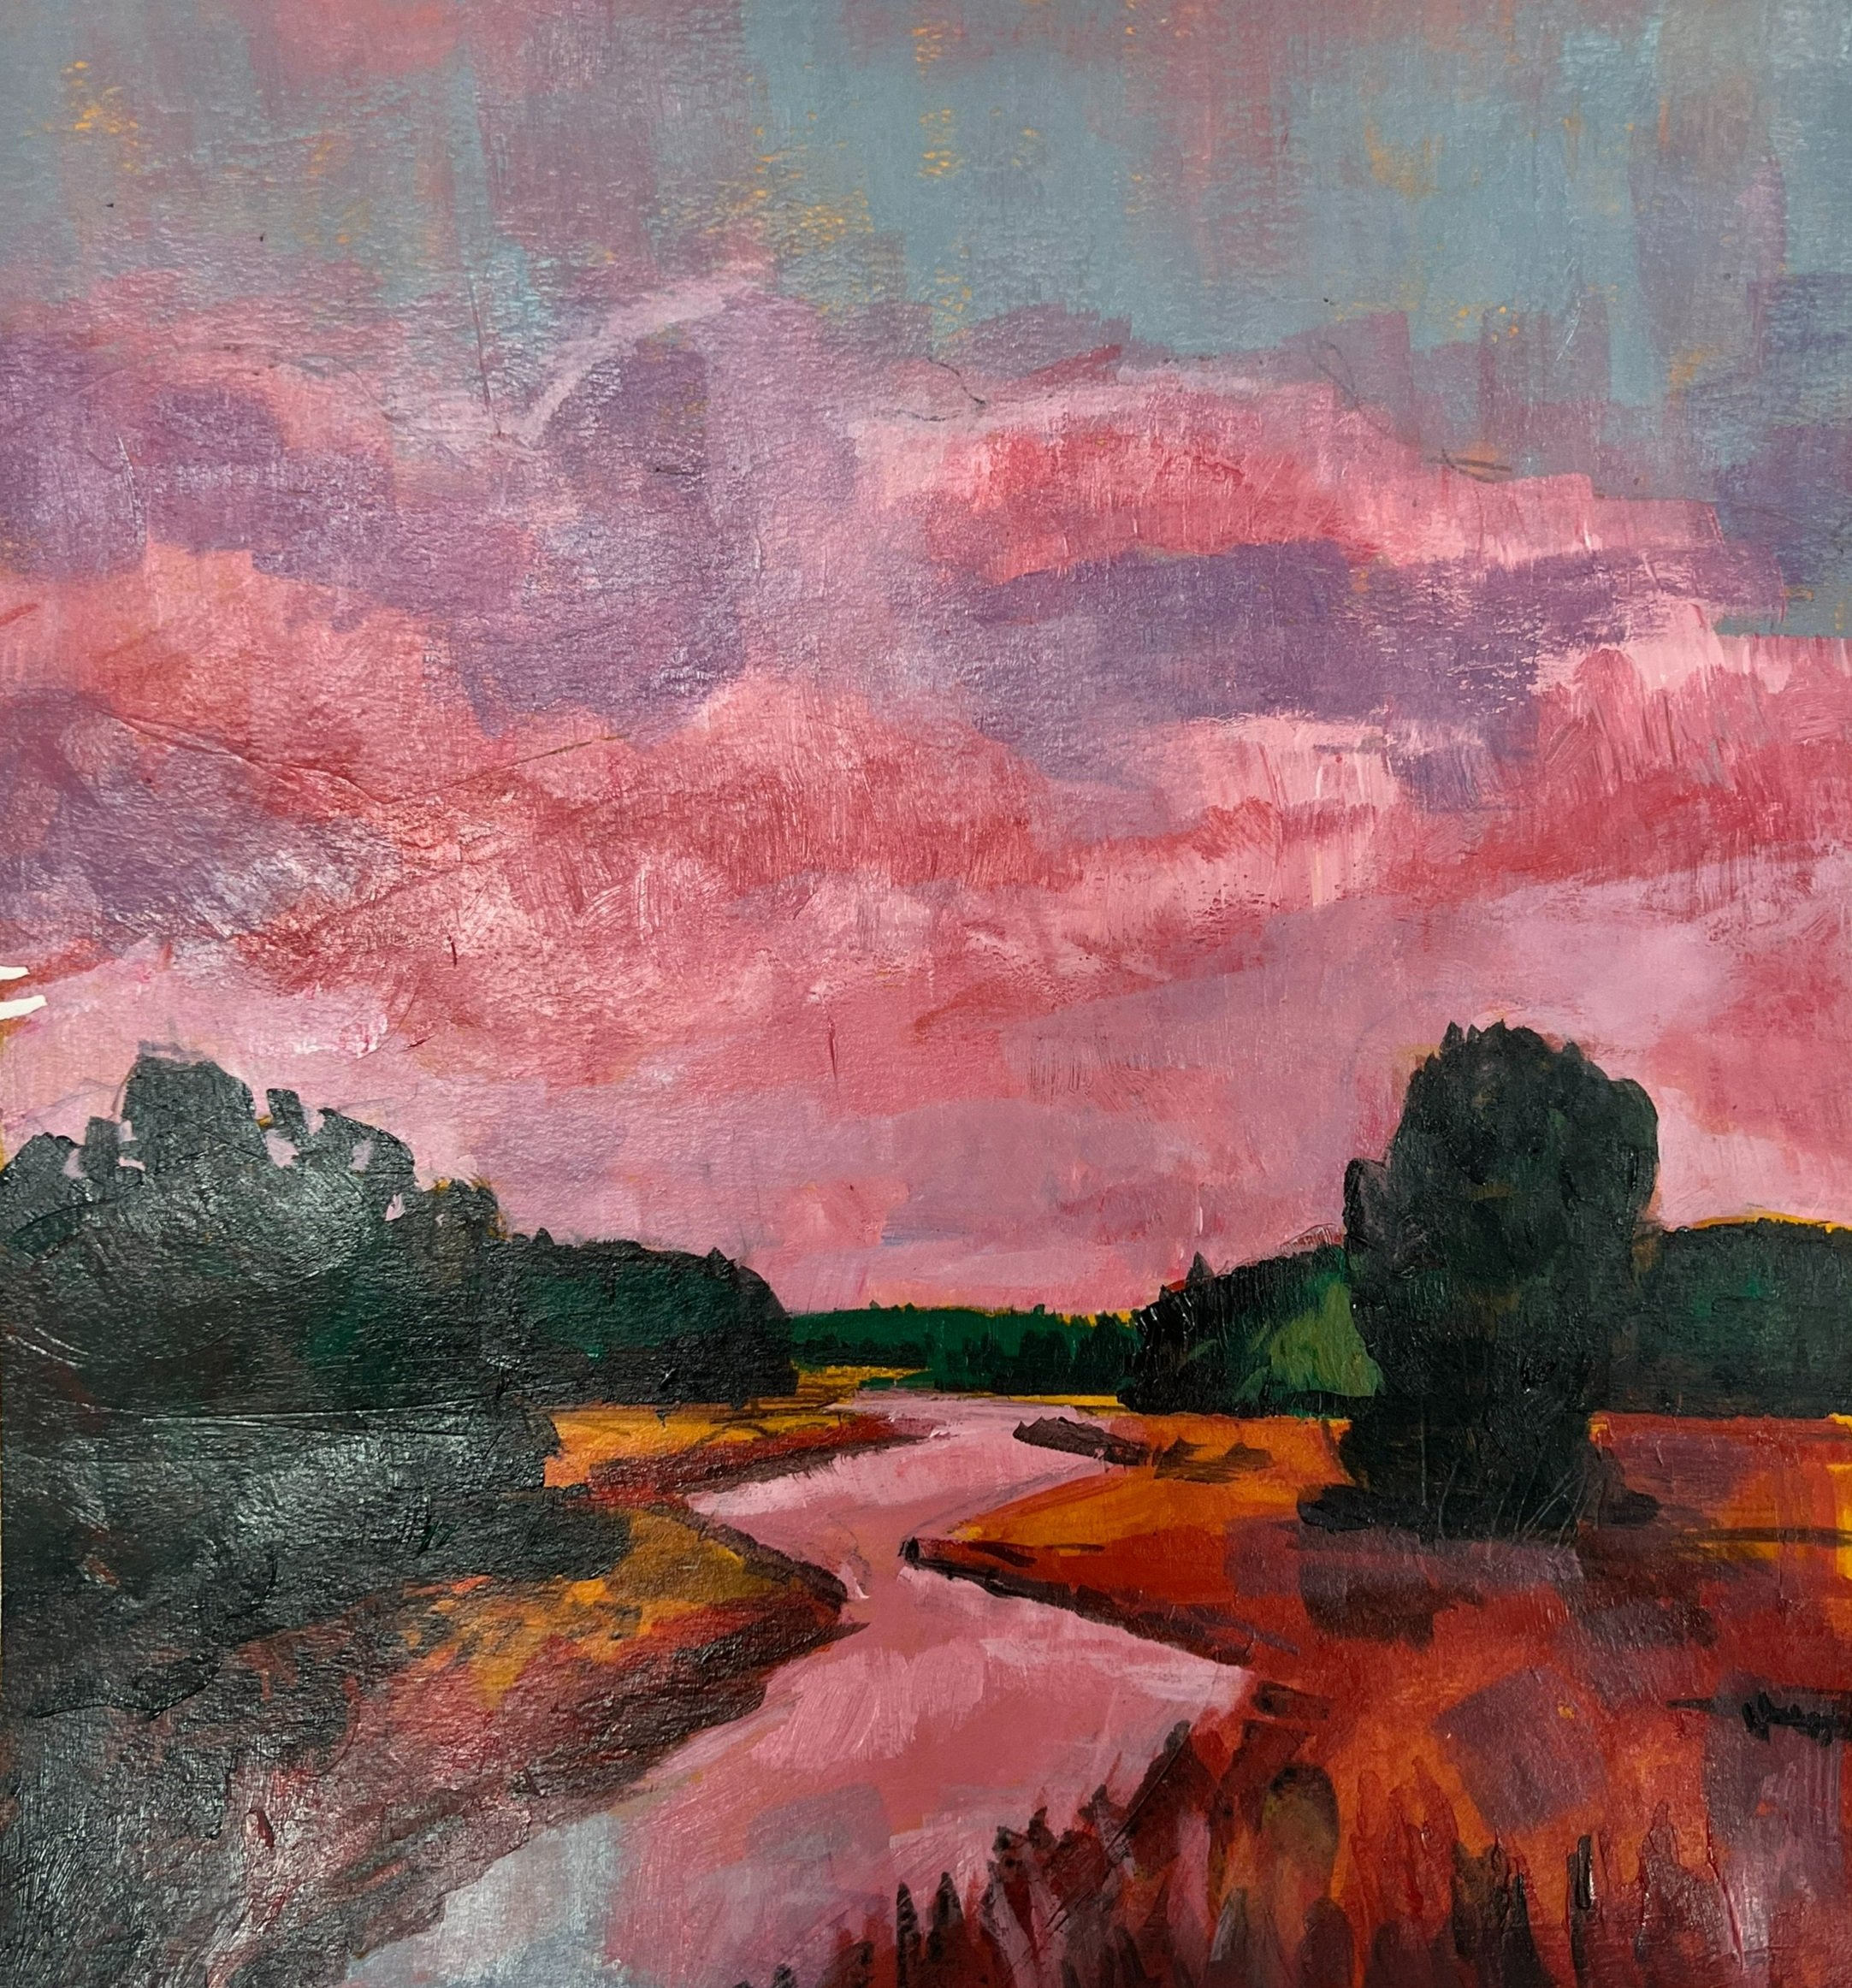 Student oil painting of landscape with pink sunset sky and warm orange foreground